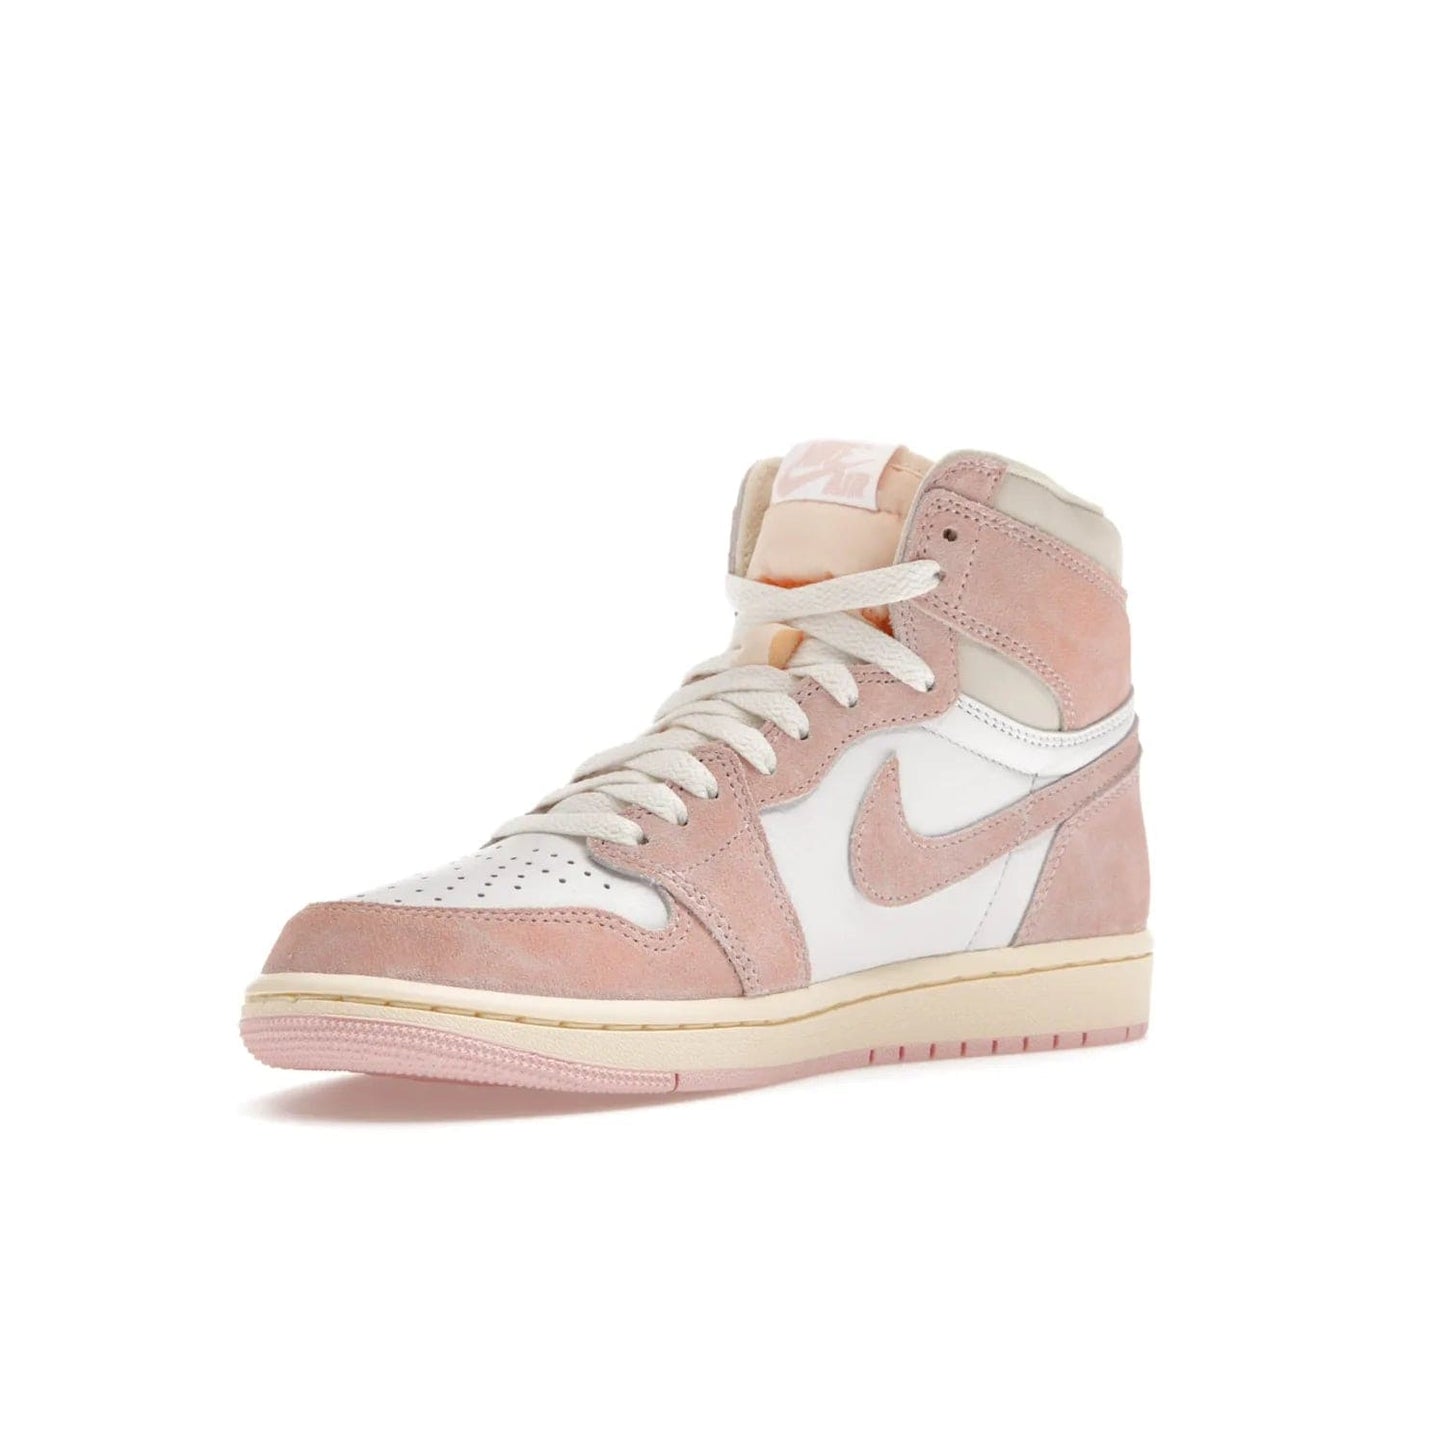 Jordan 1 Retro High OG Washed Pink (Women's) - Image 15 - Only at www.BallersClubKickz.com - Iconic Air Jordan 1 Retro High OG for women with unique pink suede and white leather uppers. Get the timeless look on April 22, 2023.